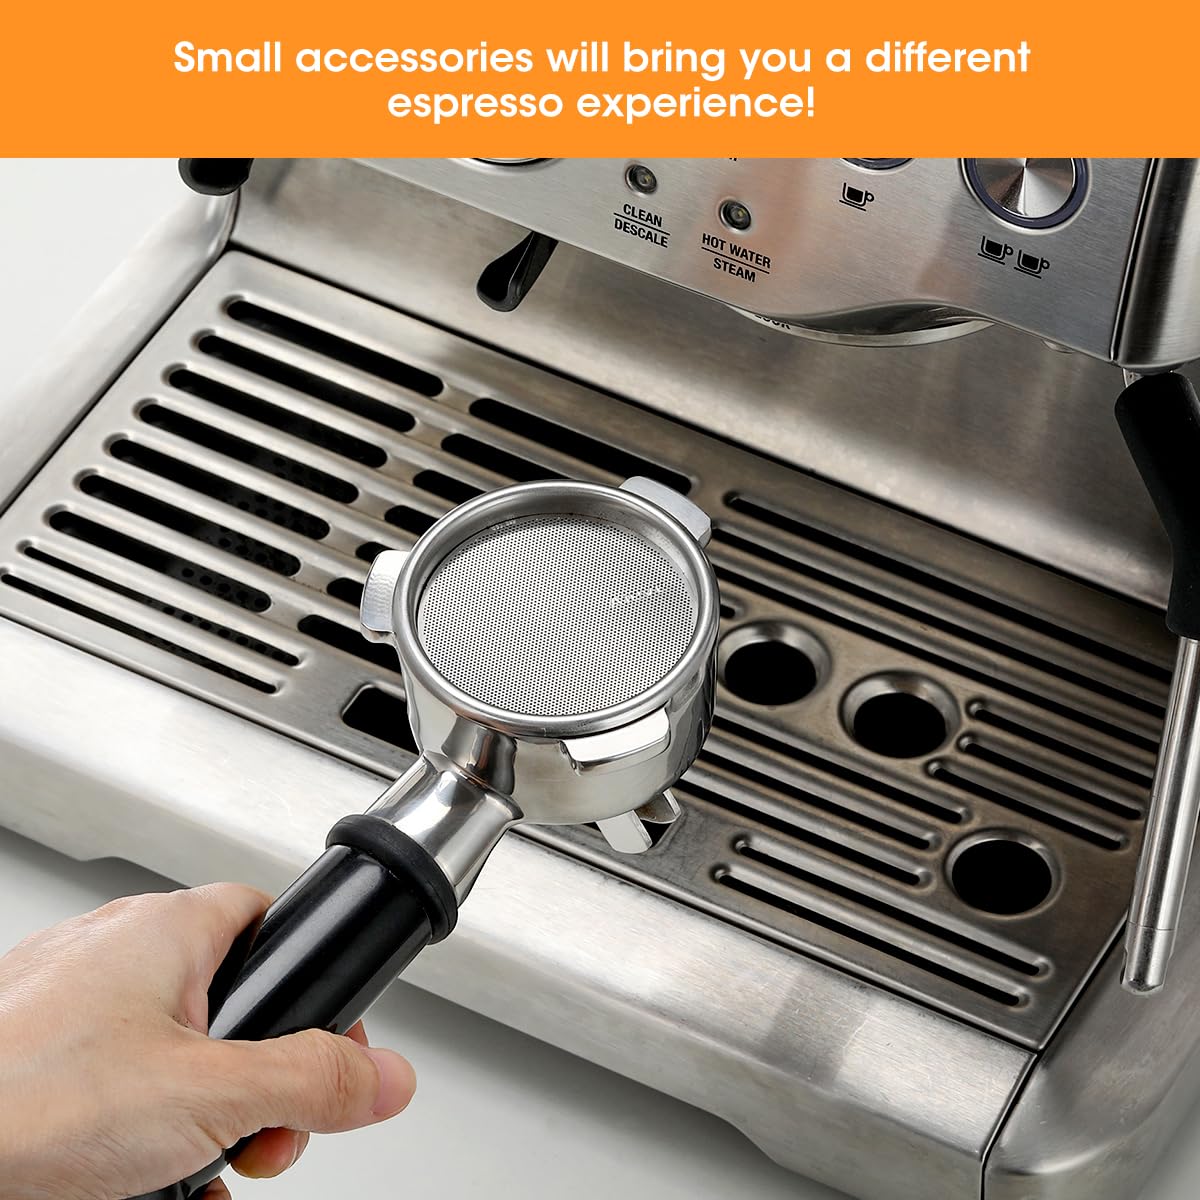 Small accessories will bring you a different espresso experience.